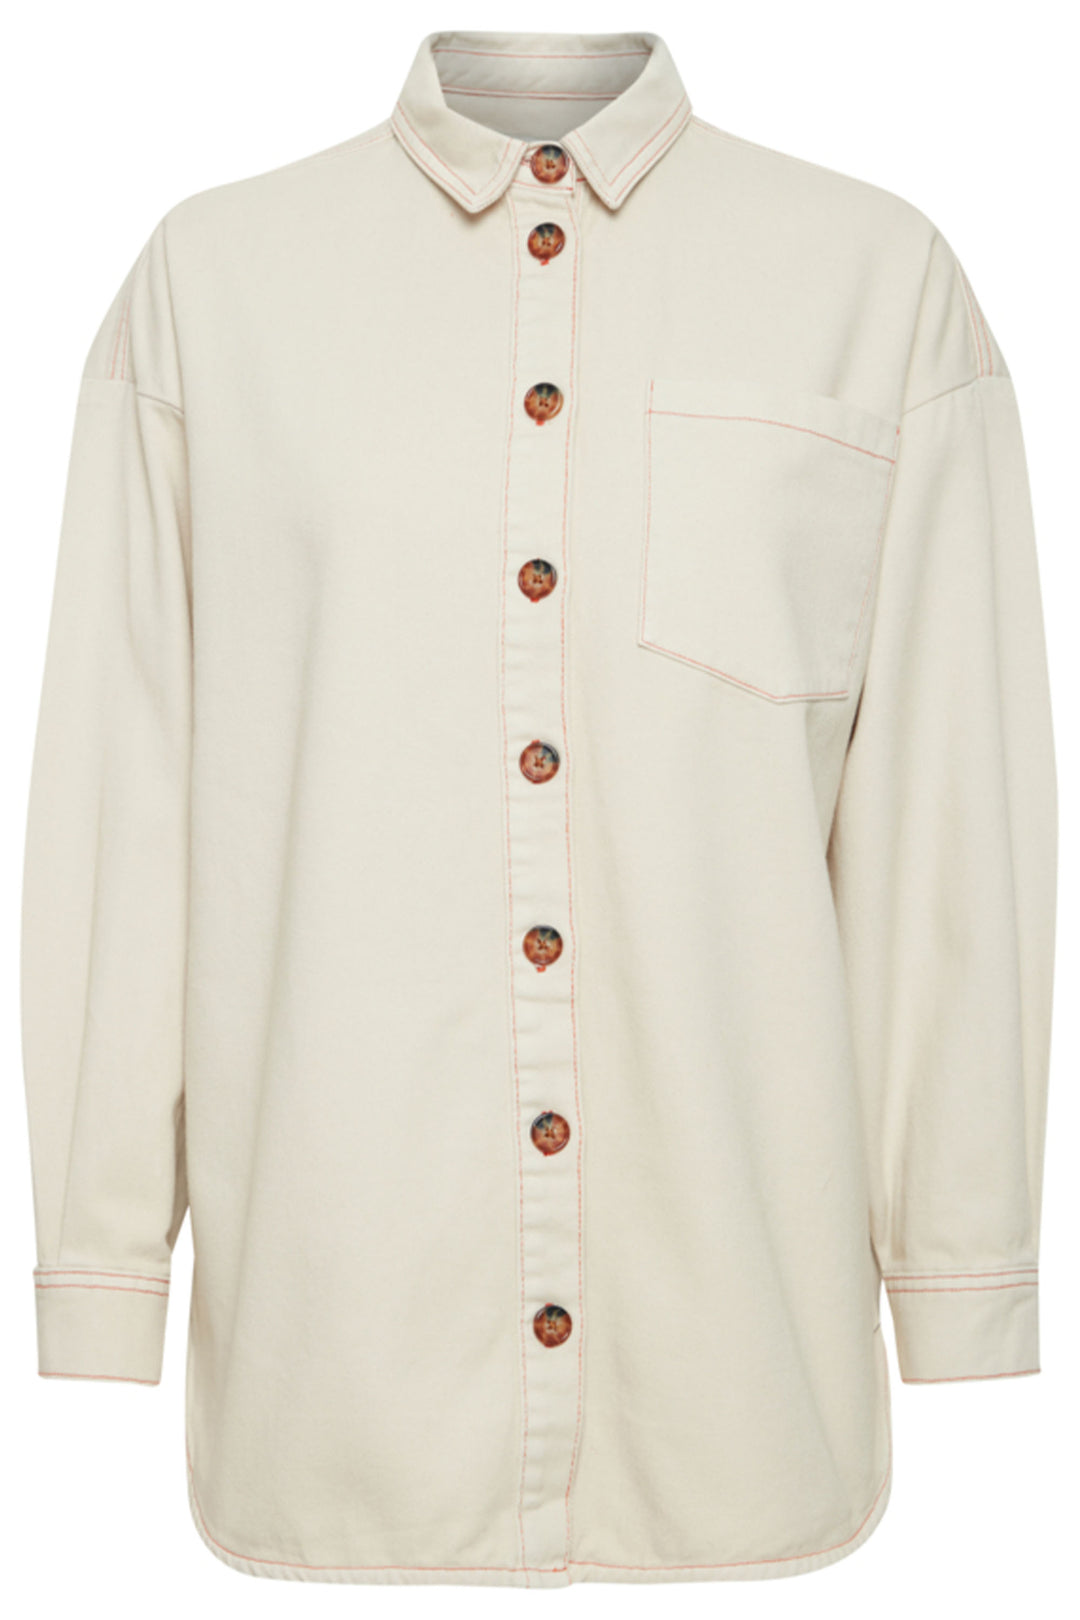 Combining the comfort of a shirt with the functionality of a jacket, it features full front bold buttons and lovely pink stitching for a unique touch. 